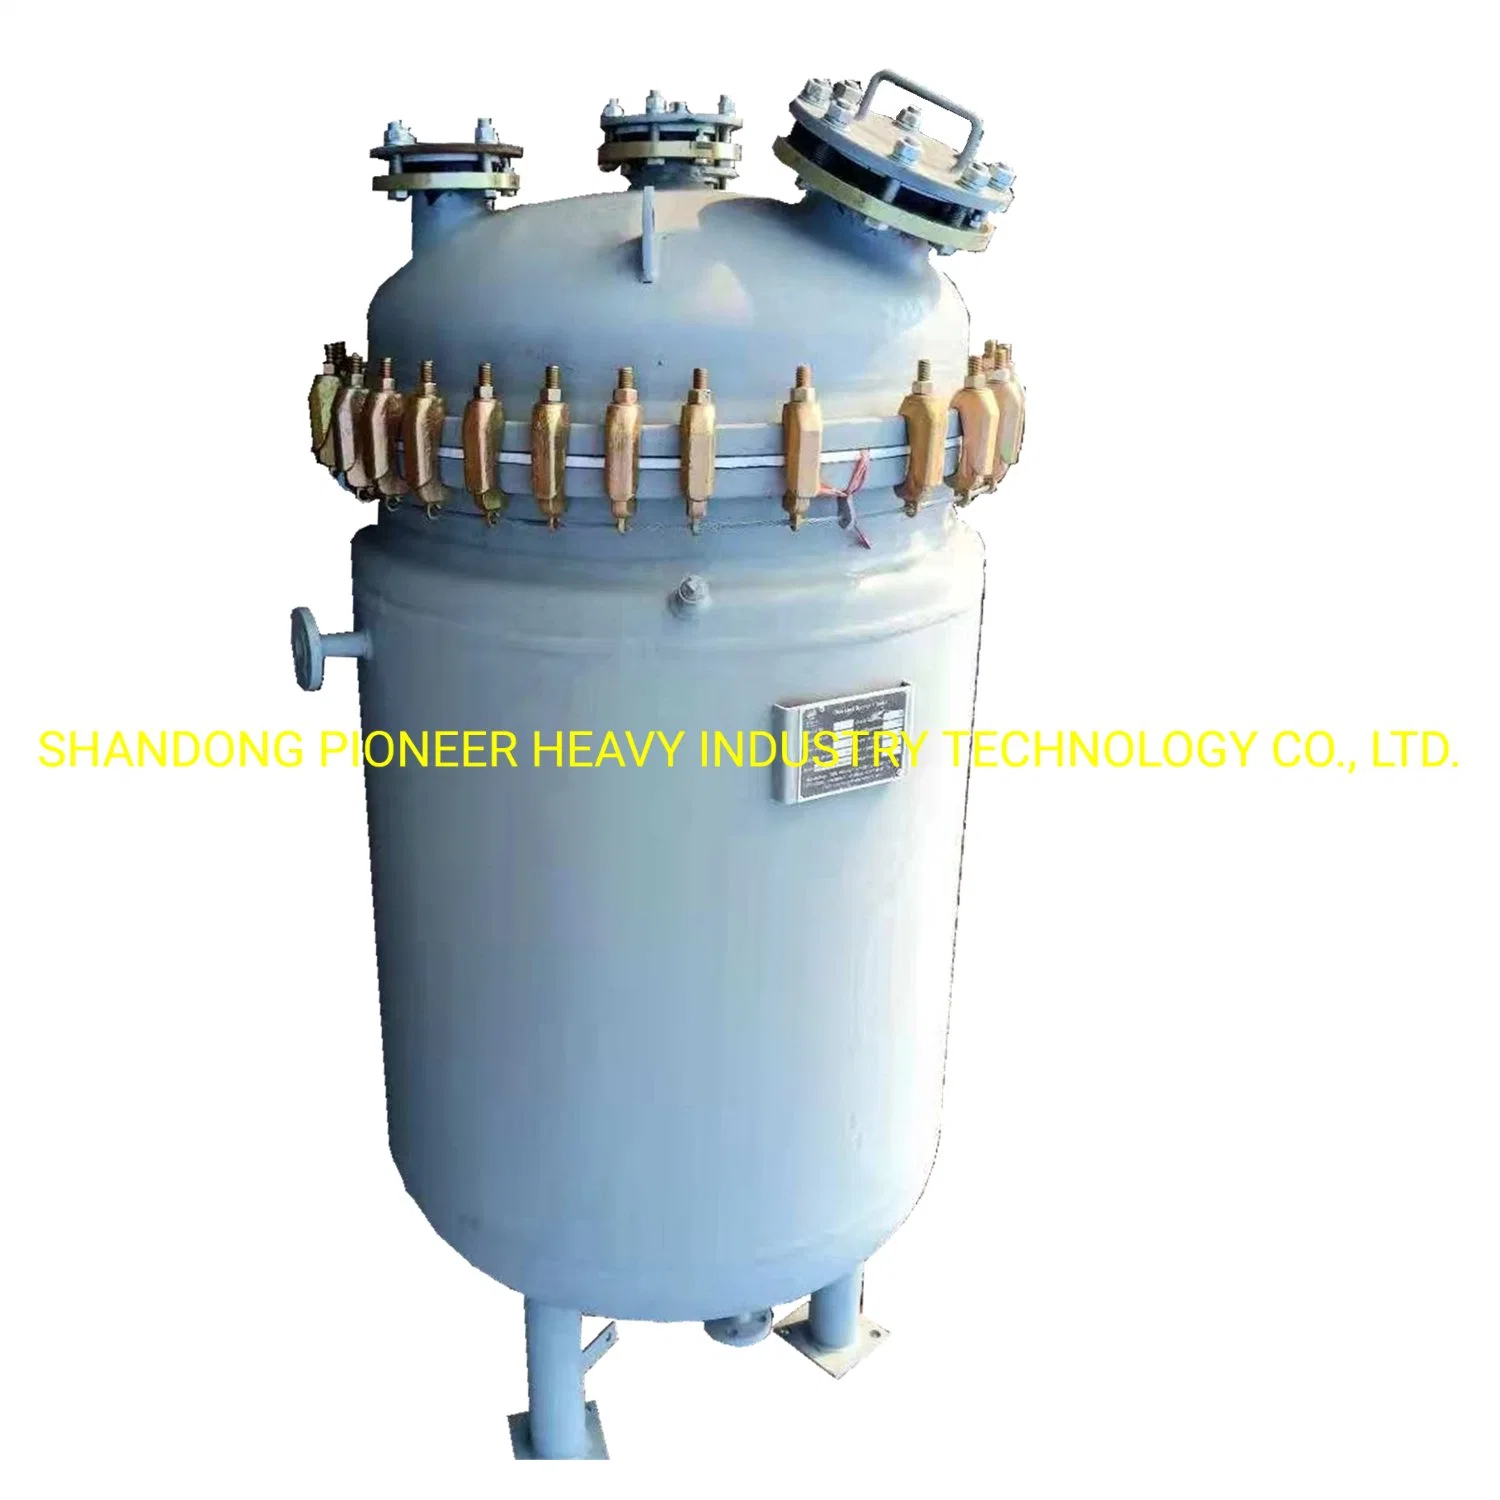 Zk-J Series Jacketed Vertical Flange Type Glass Lined Storage Tank/ Receiver